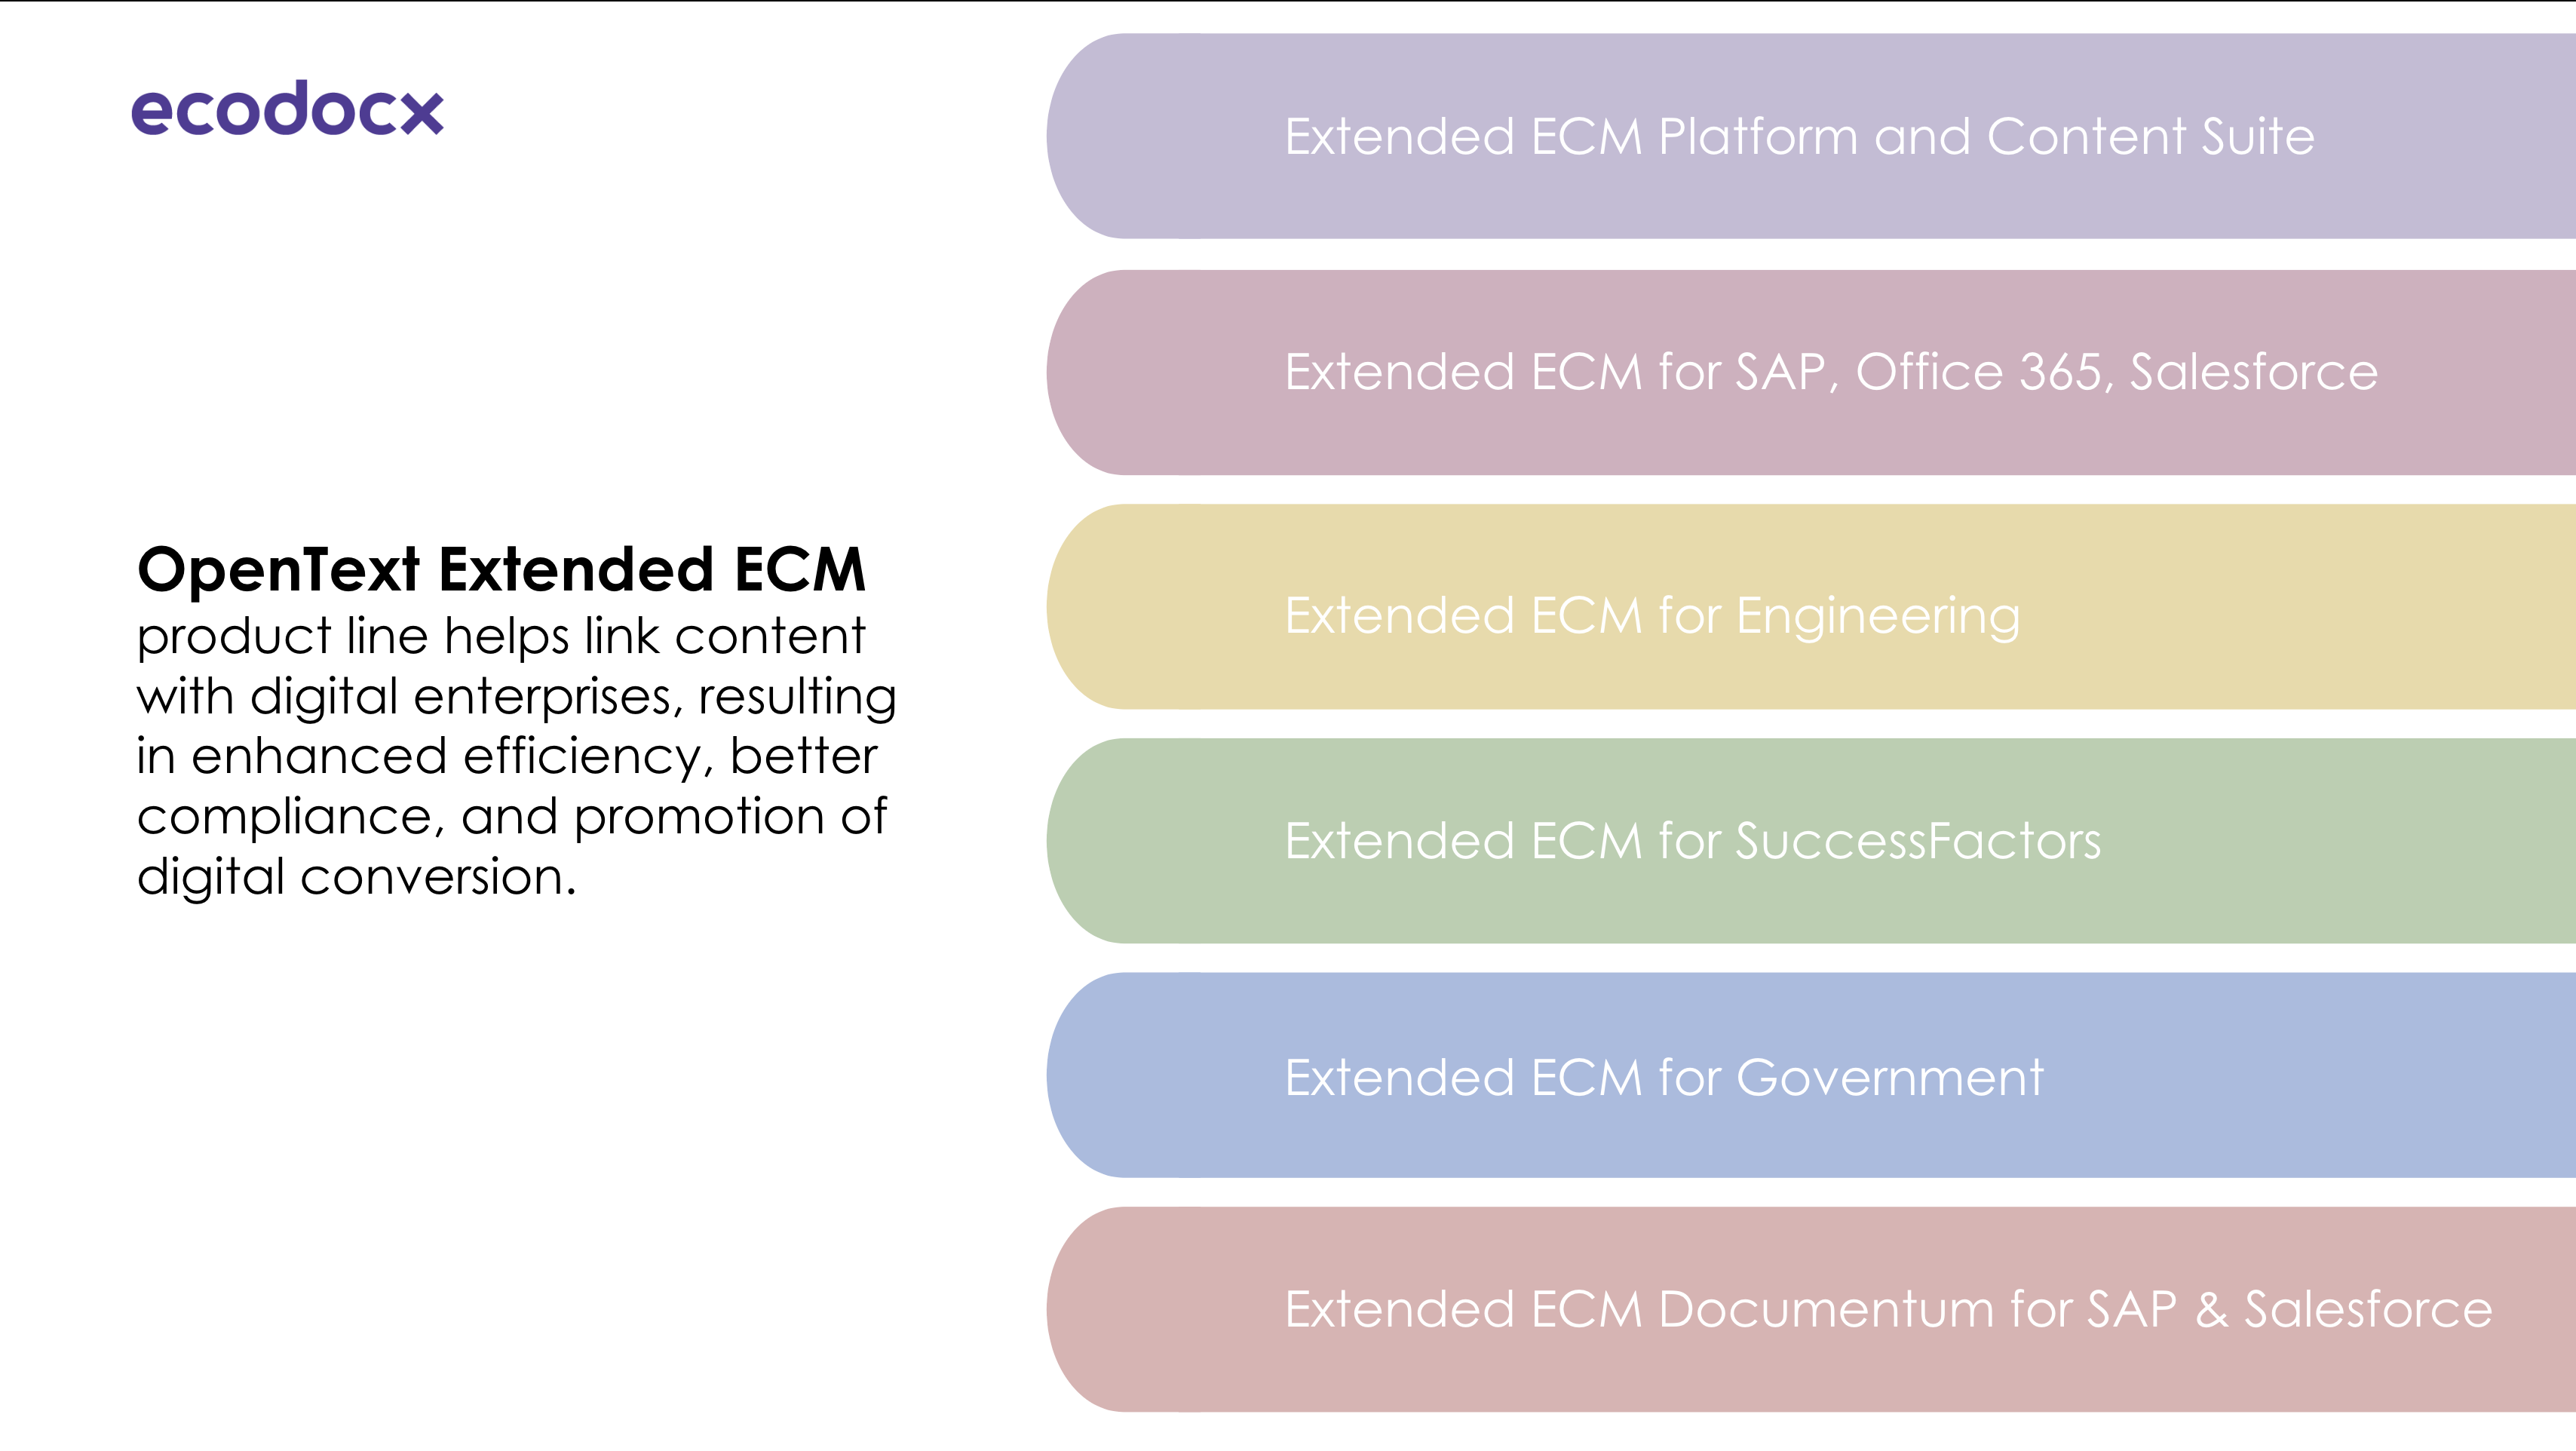 xECM cloud edition product family overview